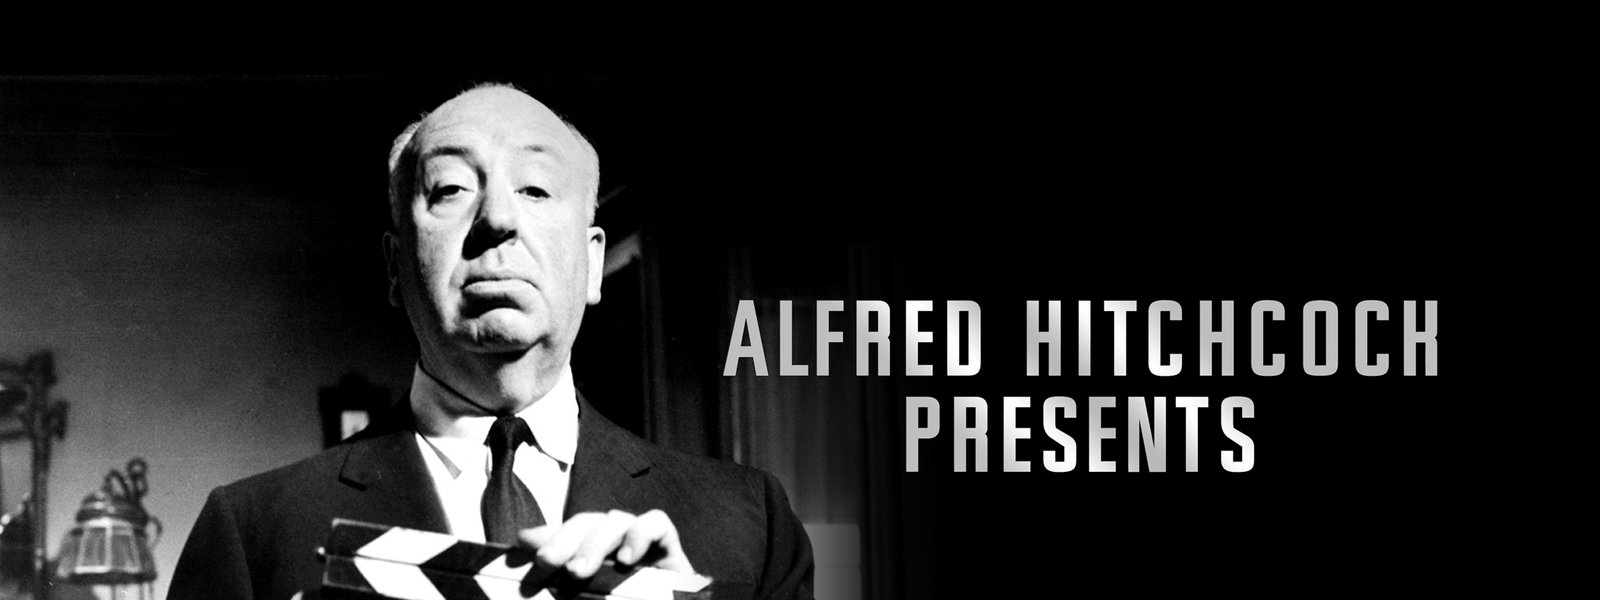 Alfred Hitchcock psycho biography director movies